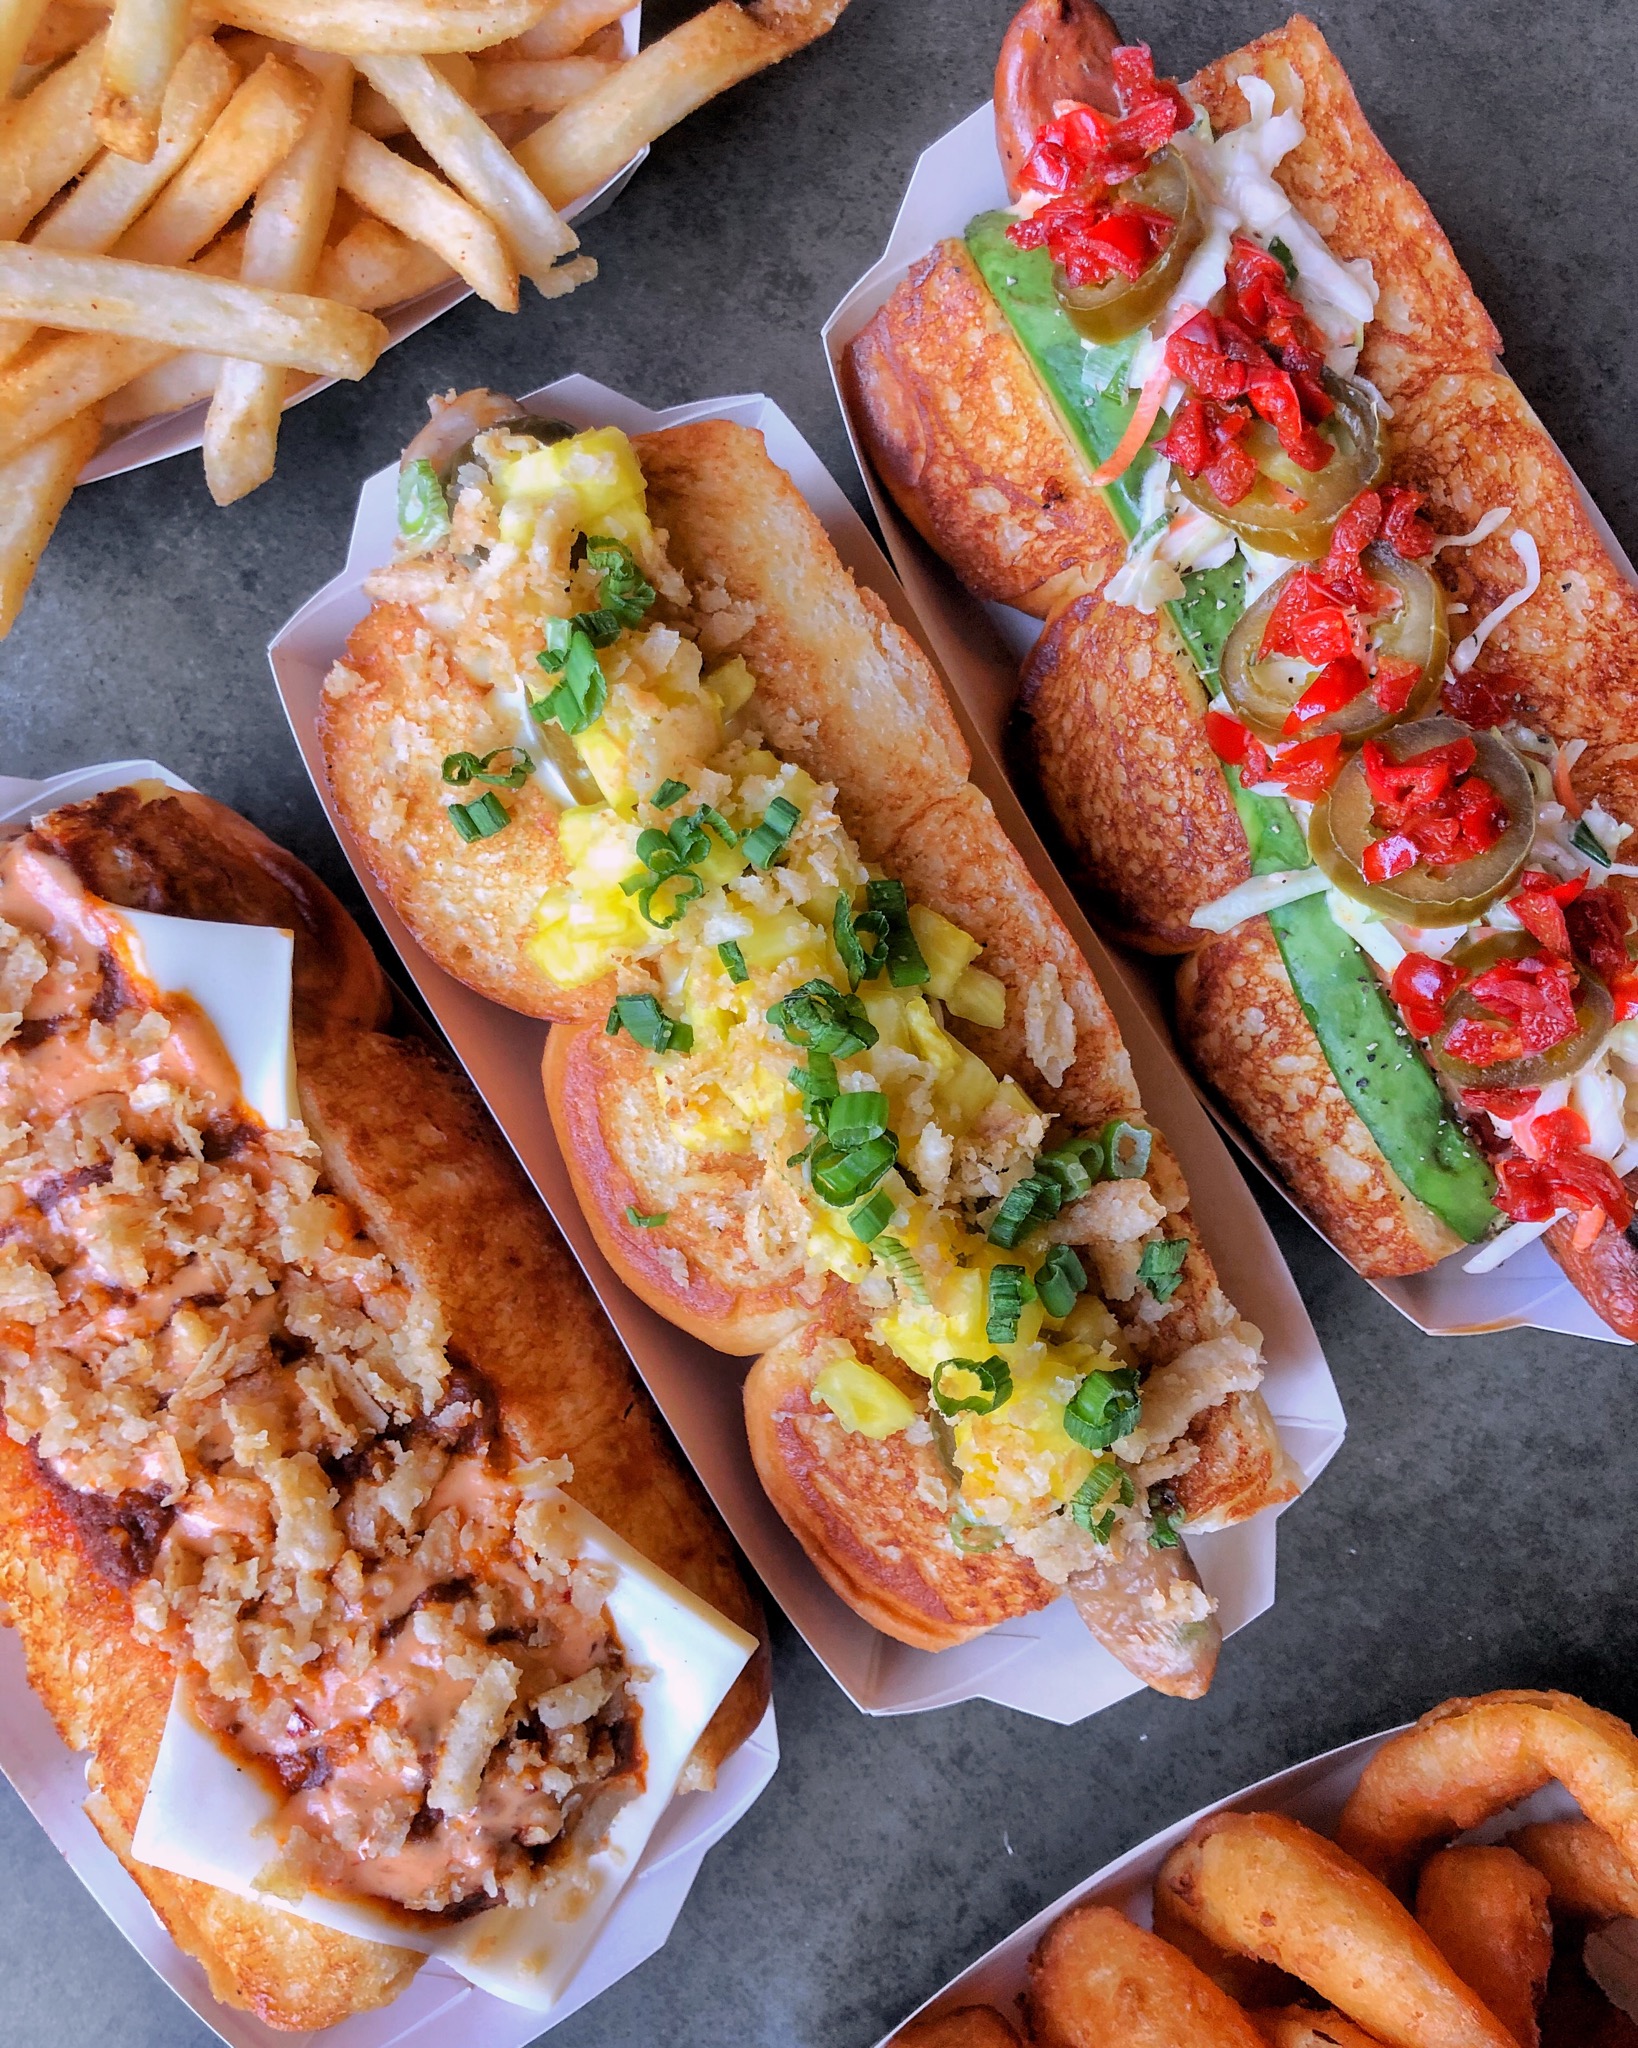 Celebrate National Hot Dog Day With Dogs From Haus